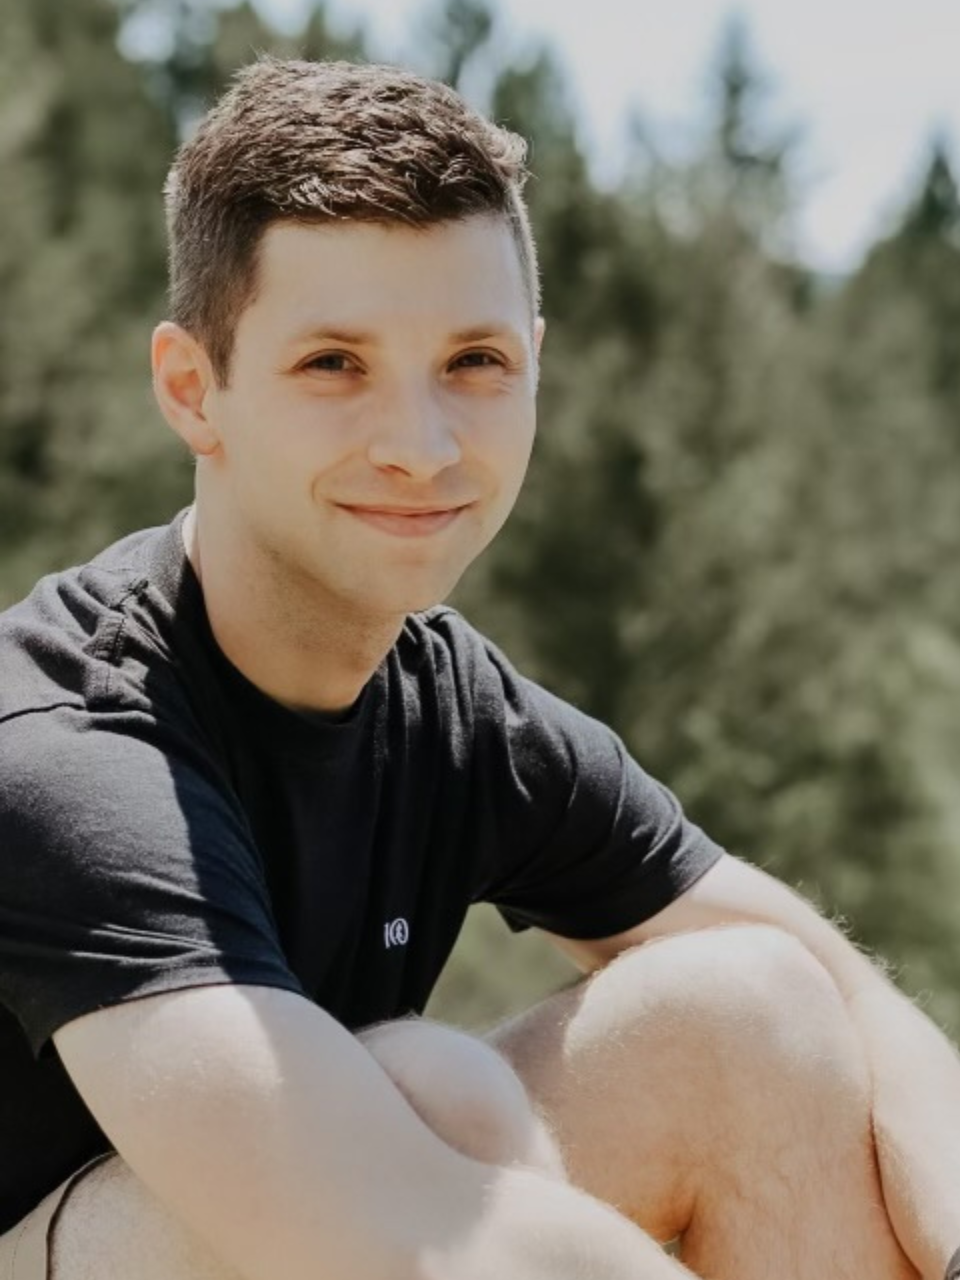 Jason is sitting outside wearing a black t-shirt smiling at the camera. In the background are green plants that are slightly blurred.